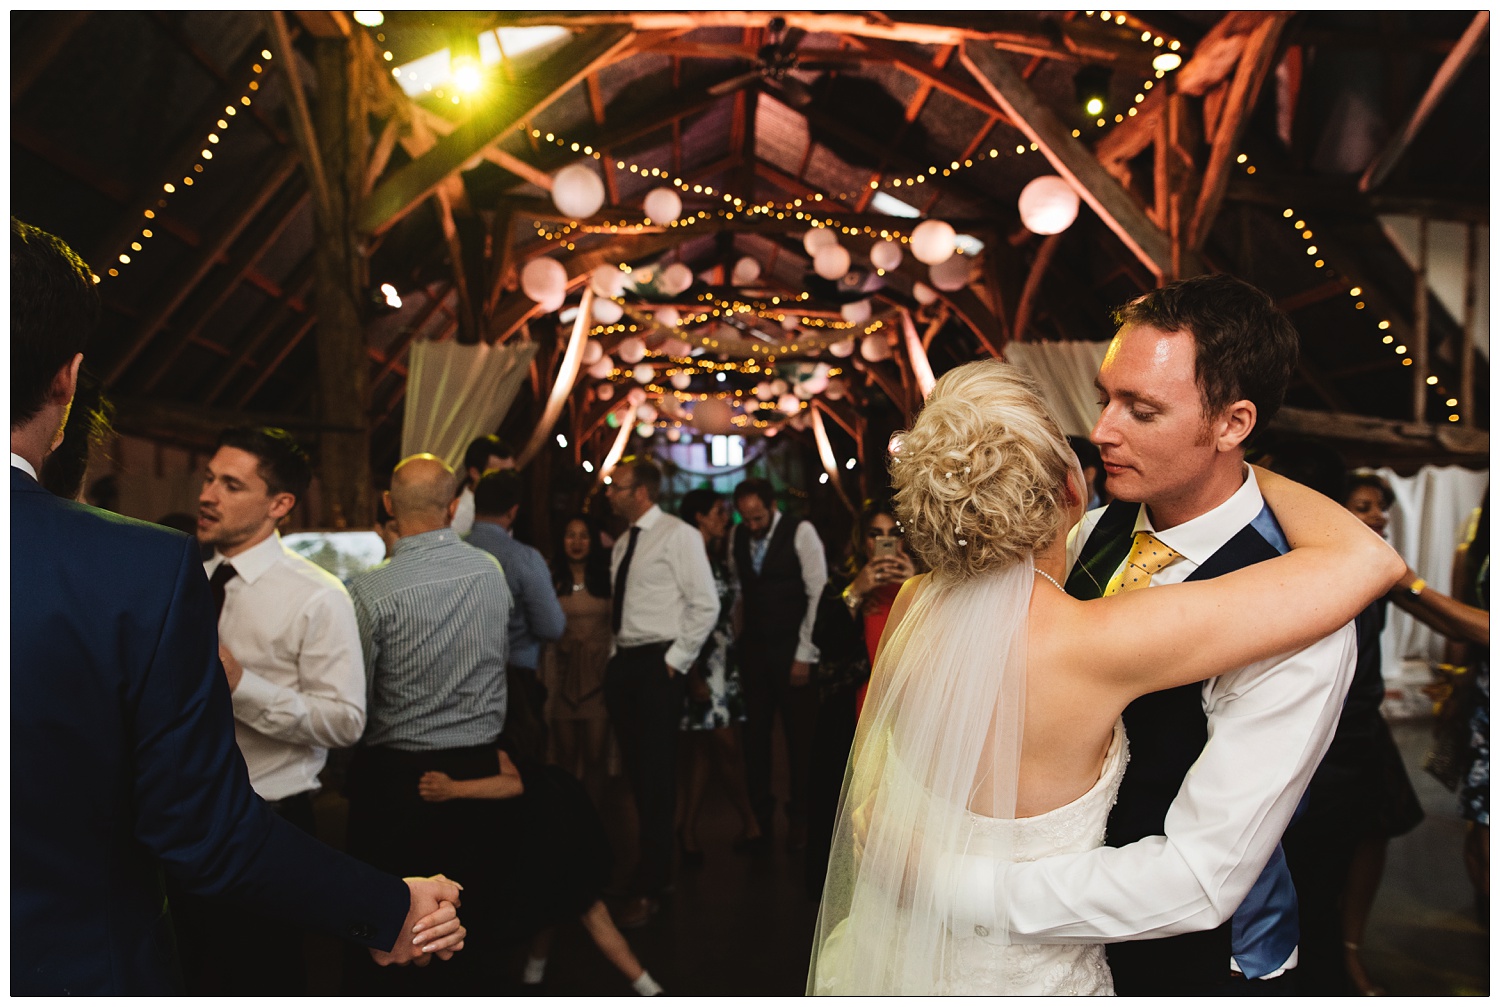 Fairly lights and paper lanterns decorate the barn in Alpheton at a wedding reception. The newly married couple dance in the foreground.